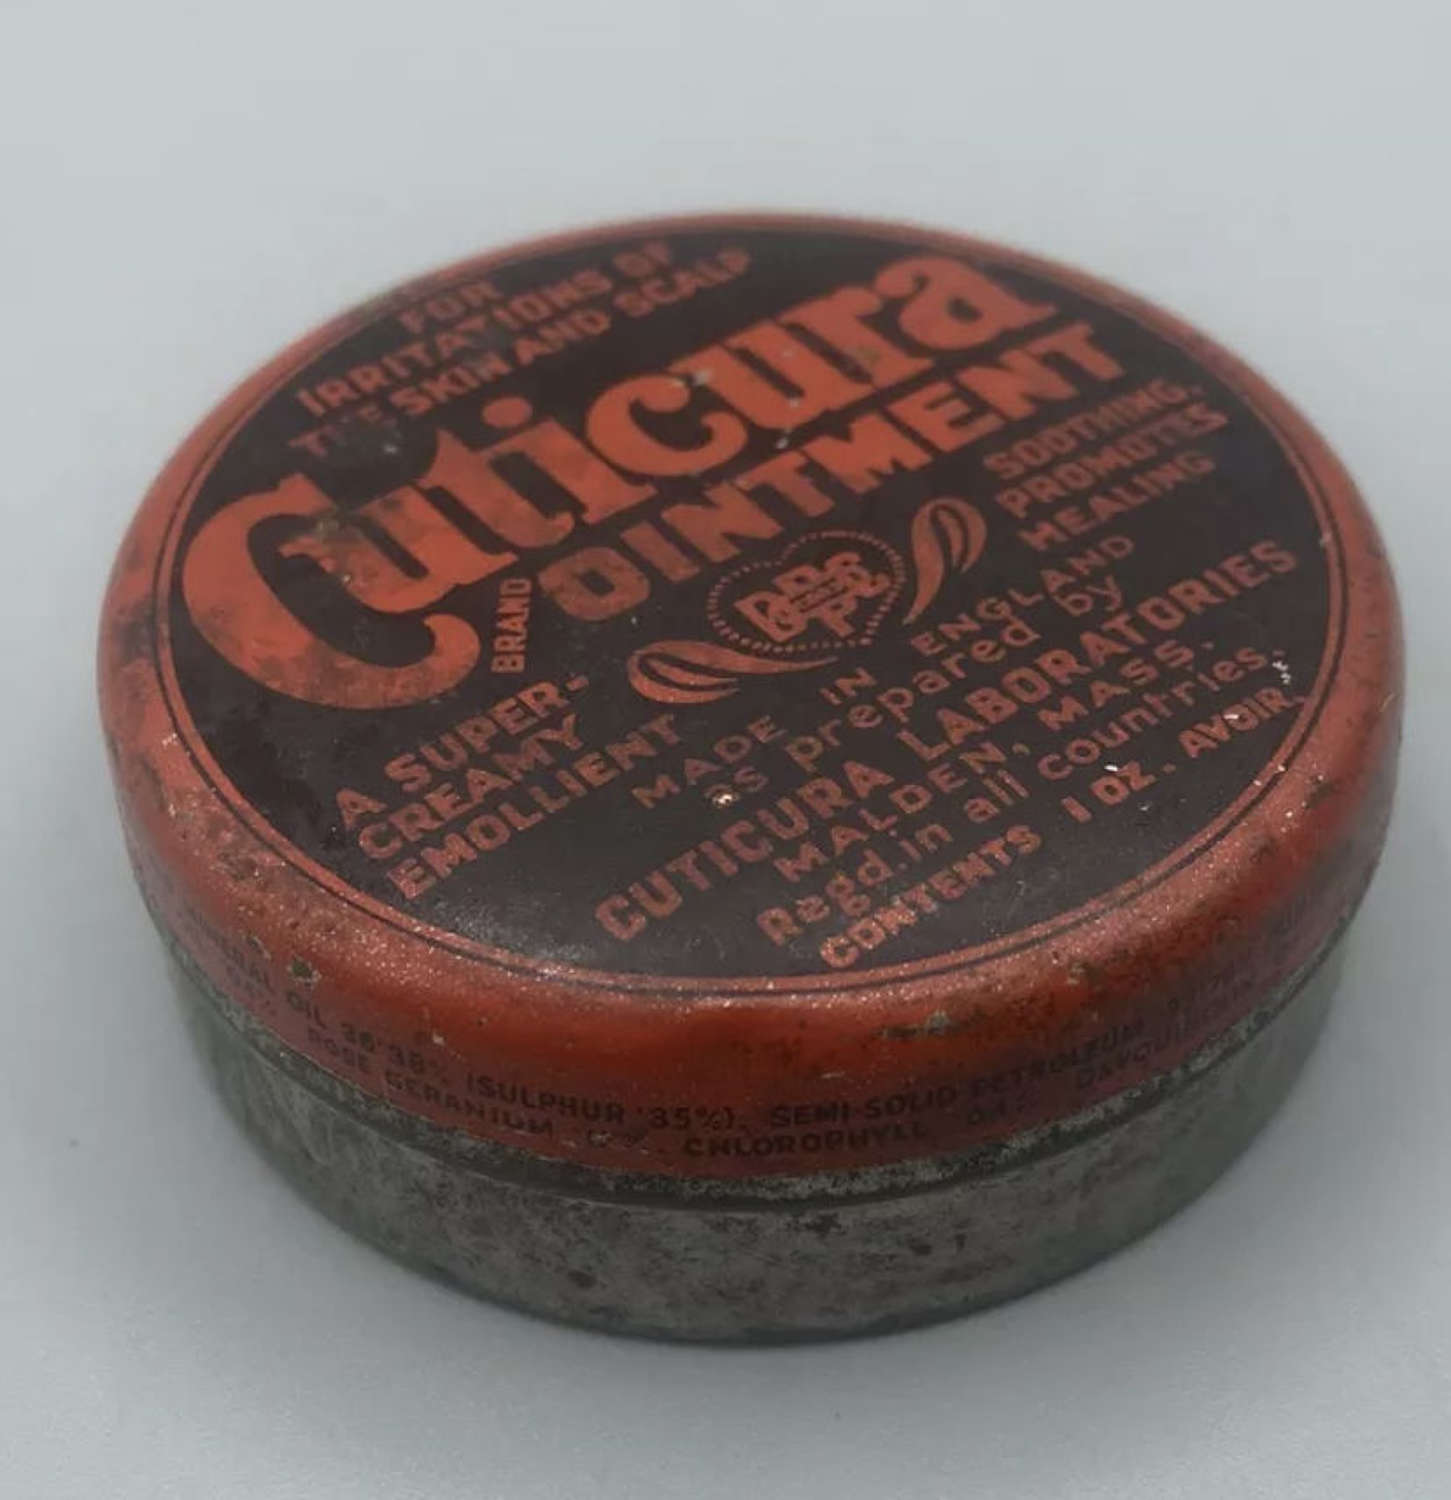 WW1 British Home Front Cuticura Brand Ointment For Irritations